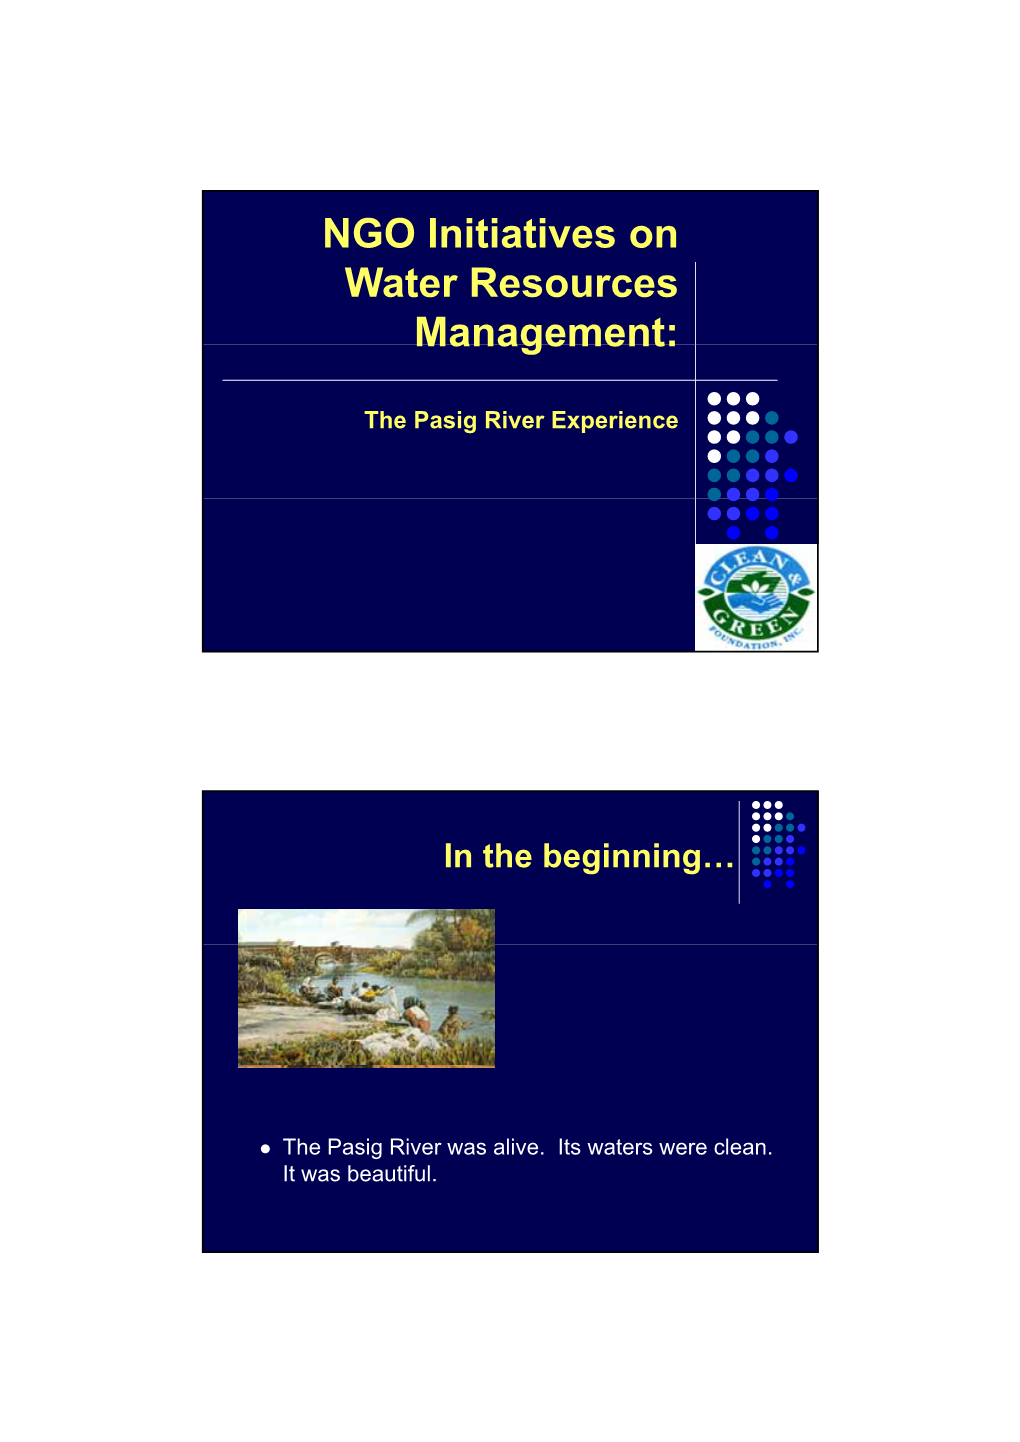 NGO Initiatives on Water Resources Management